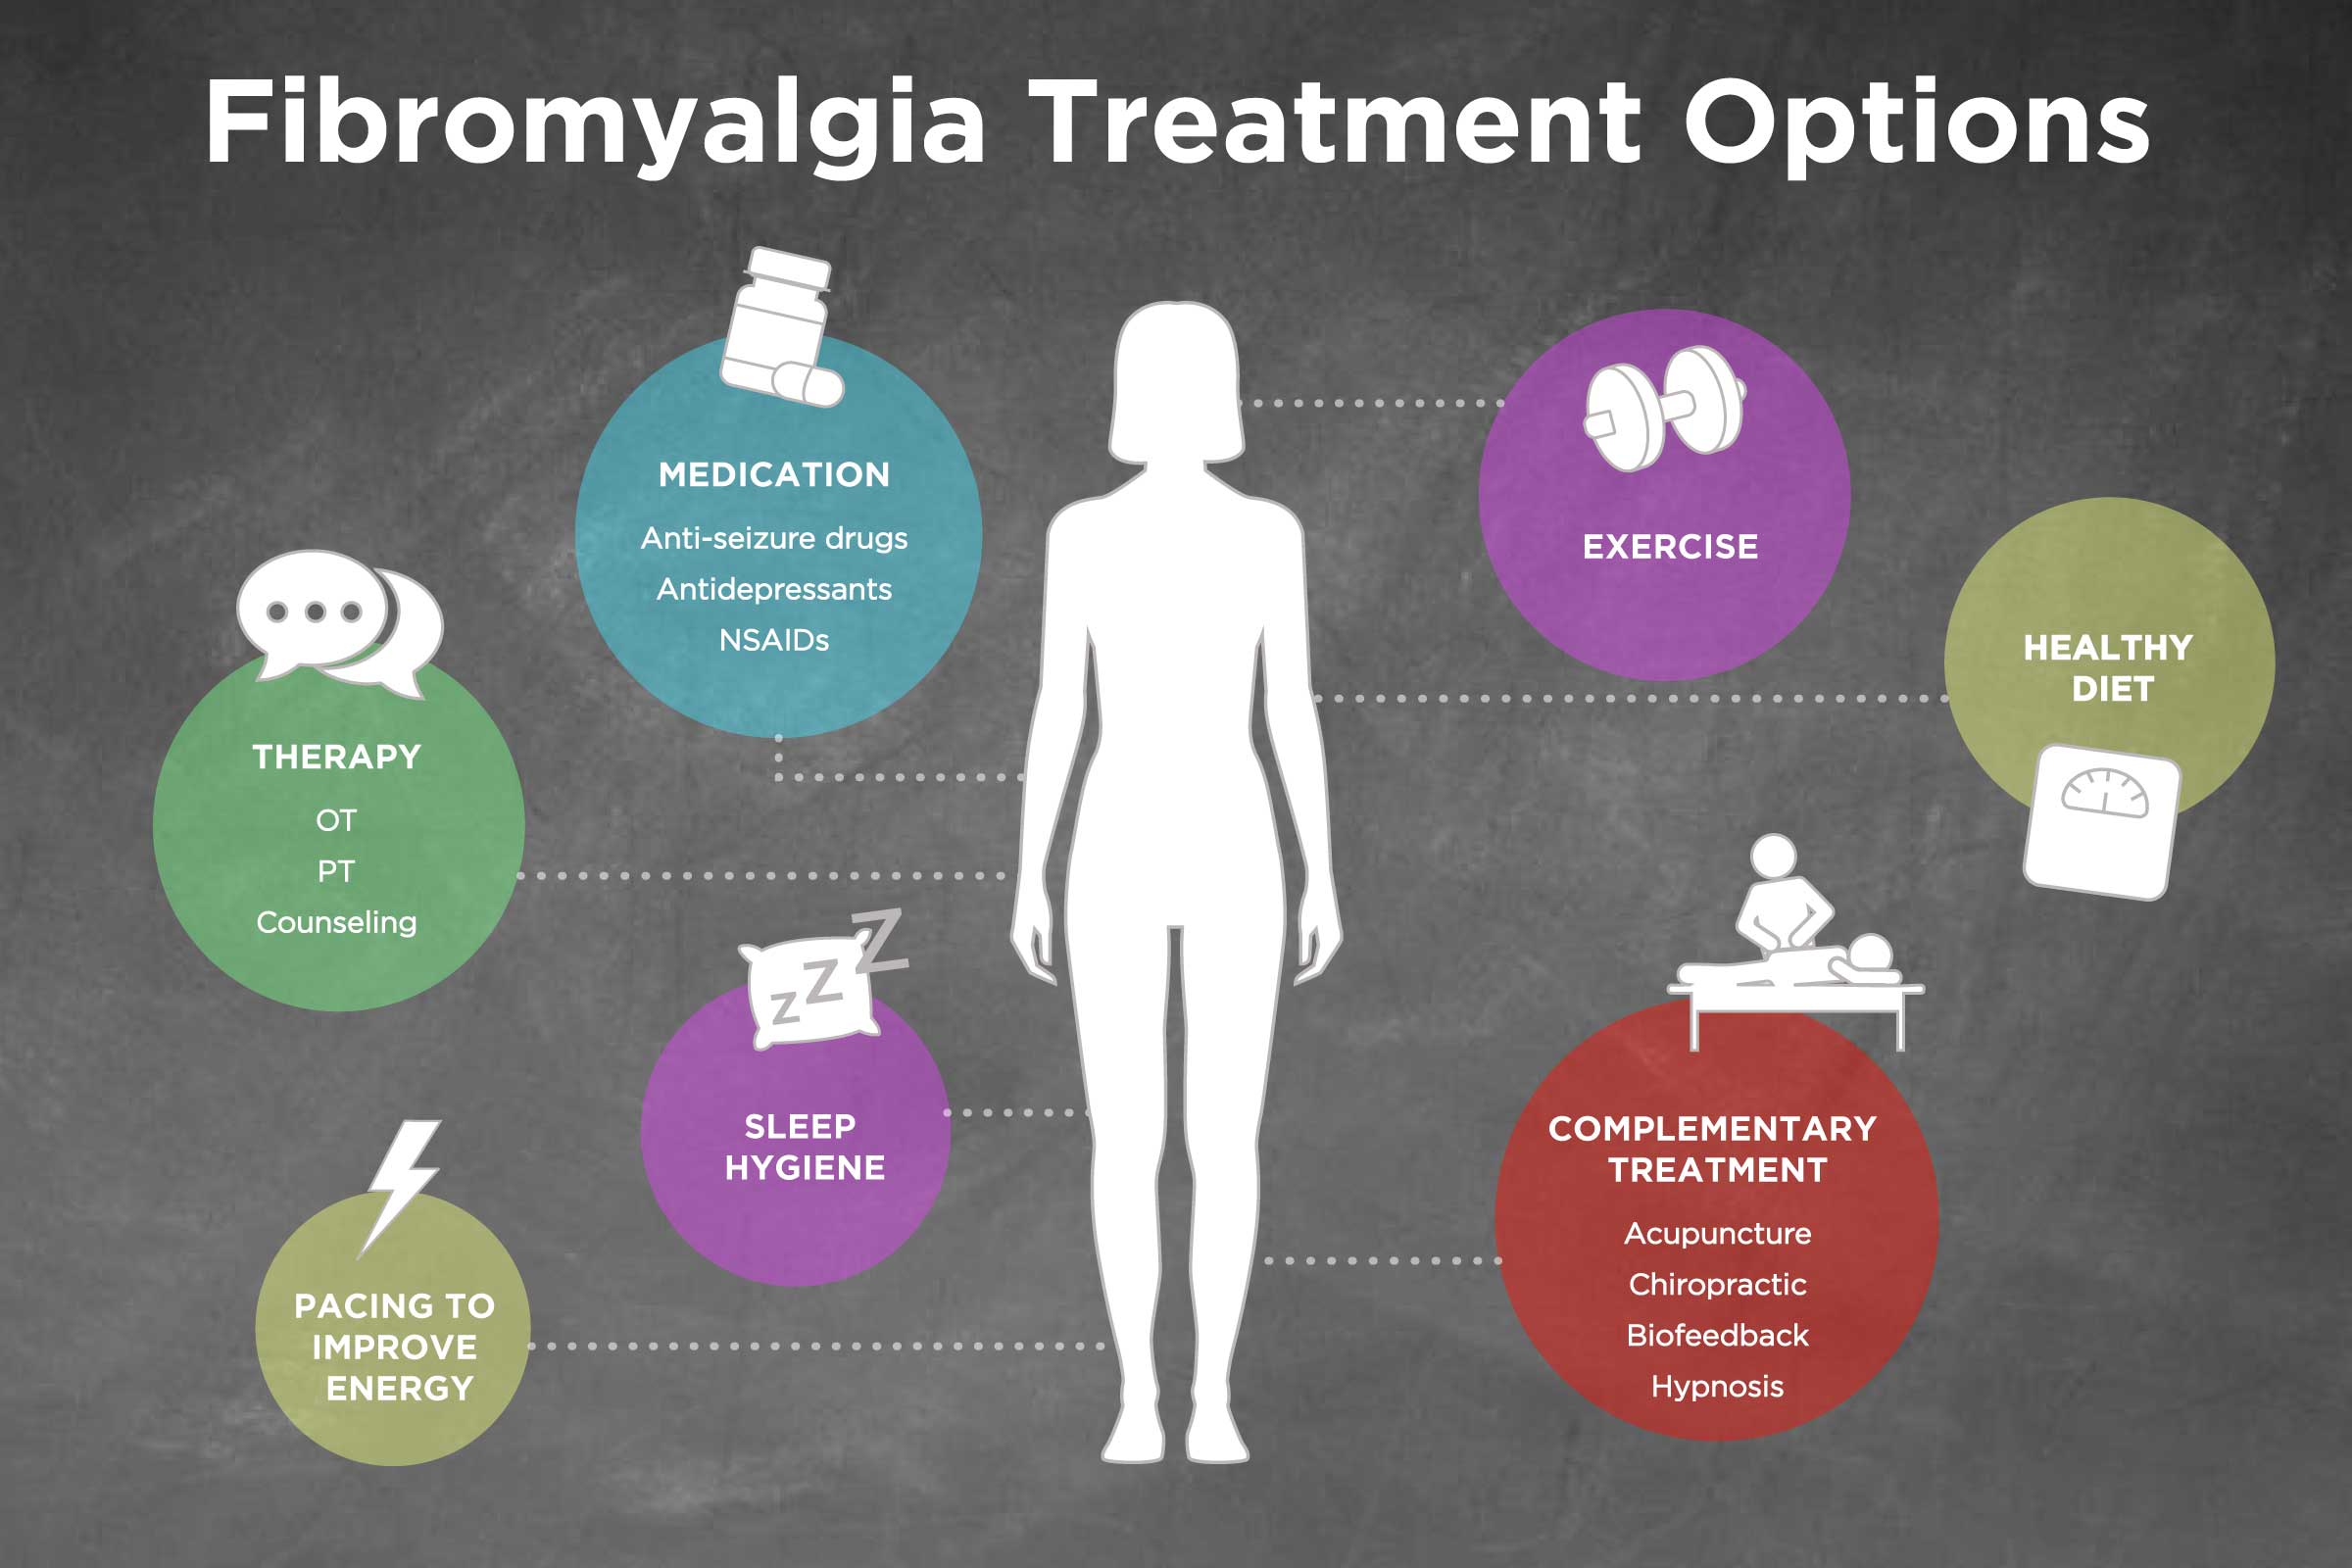 Fibromyalgia Treatment Medications, Exercise, Diet, and More